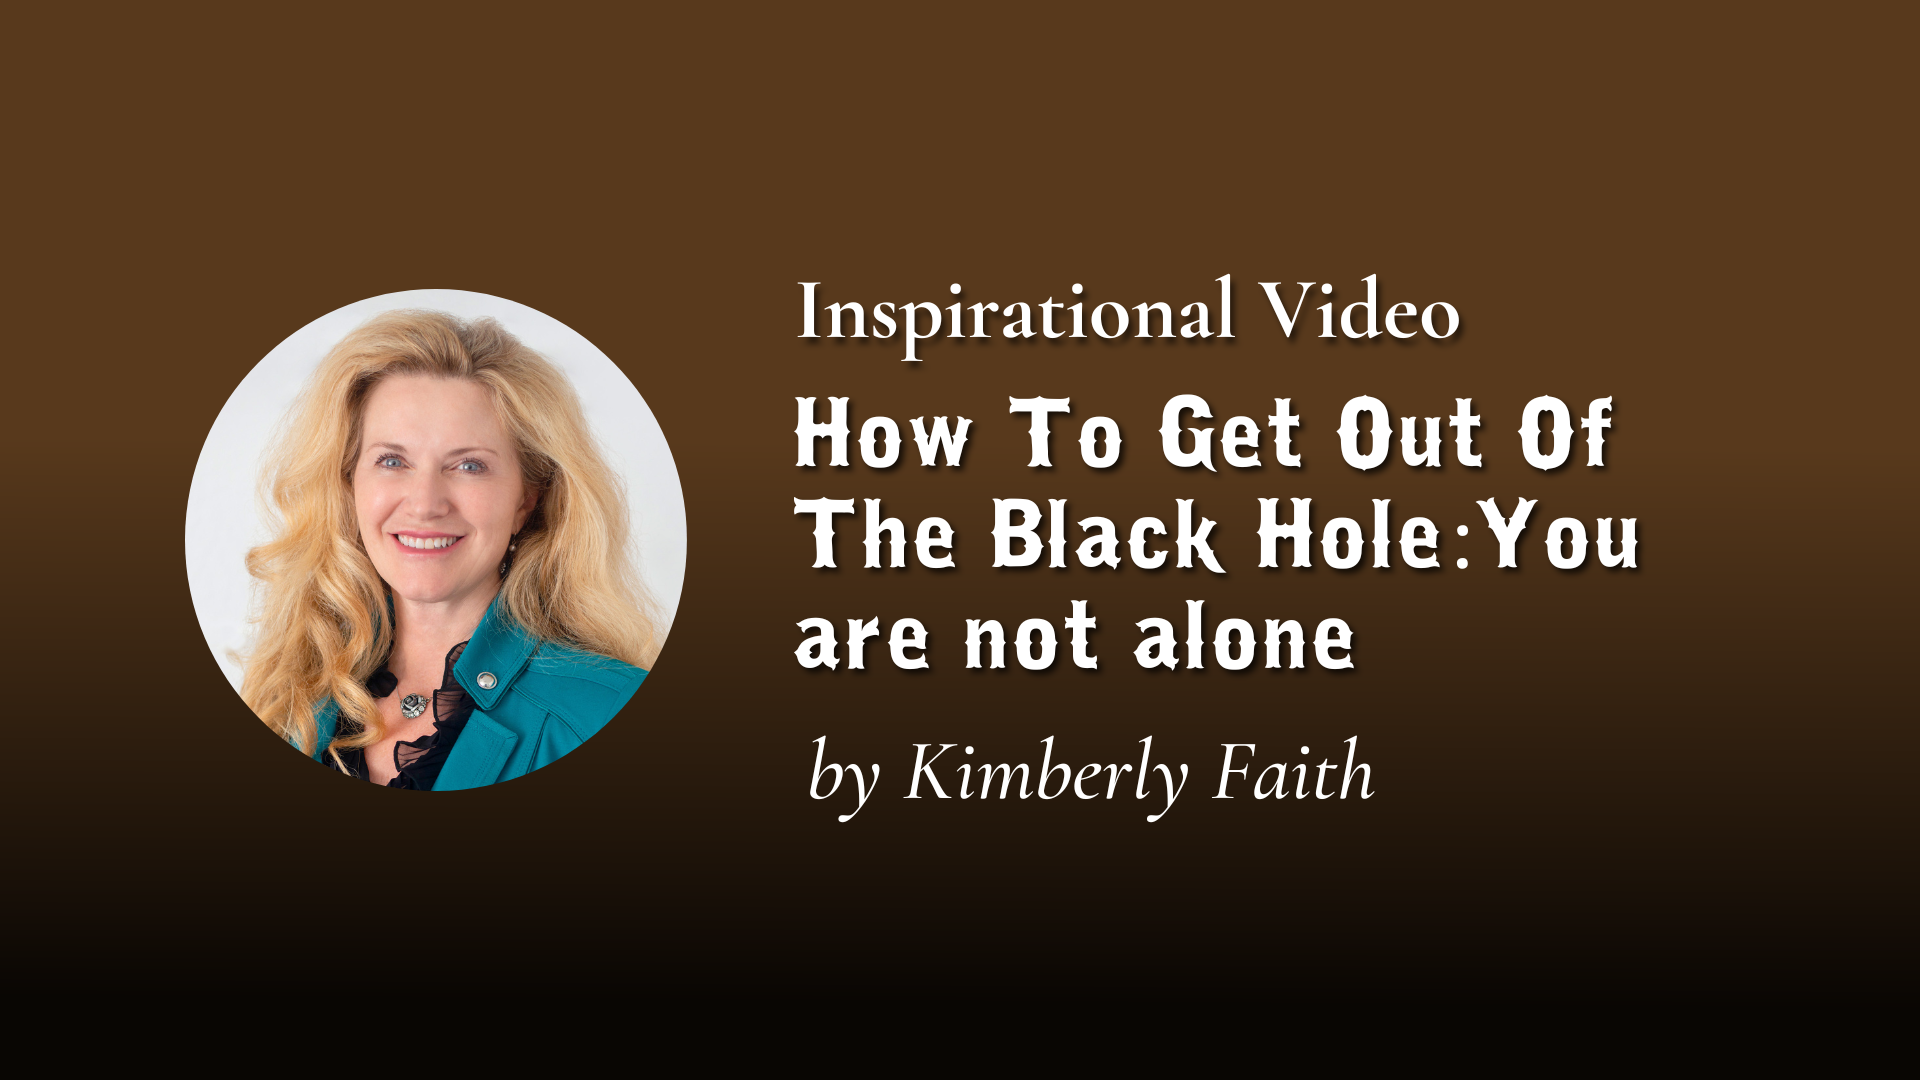 Getting Out Of The Black Hole: You Are Not Alone